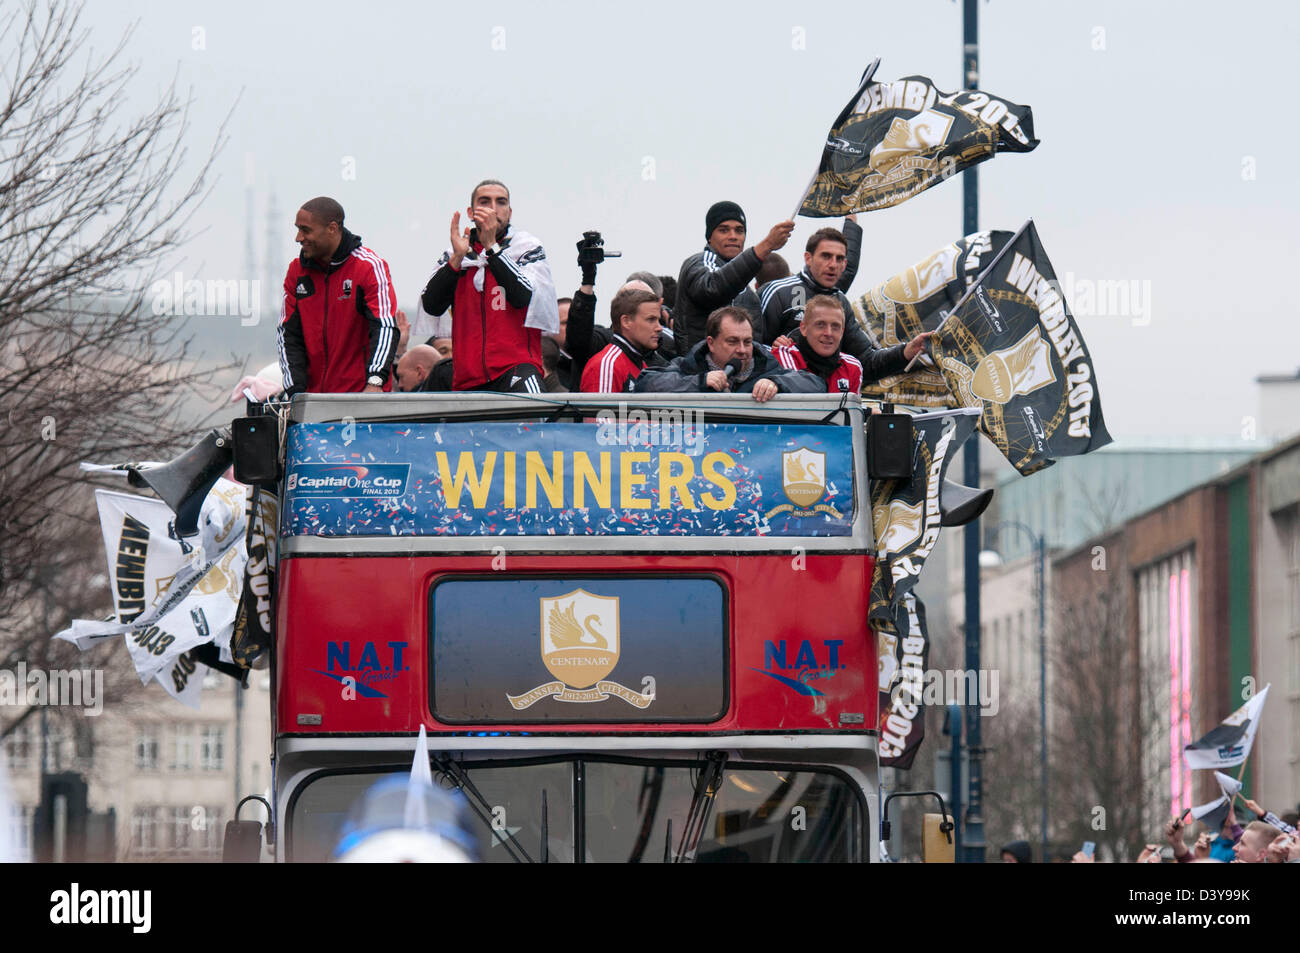 Swansea, Wales, UK. 26th February 2013. Swansea City Football team and fans celebrating during an open-top bus parade through the centre of Swansea after beating Bradford City 5-0 in Sunday's Capital One Cup final at Wembley to win the Capital Cup trophy. Credit:  Phil Rees / Alamy Live News Stock Photo